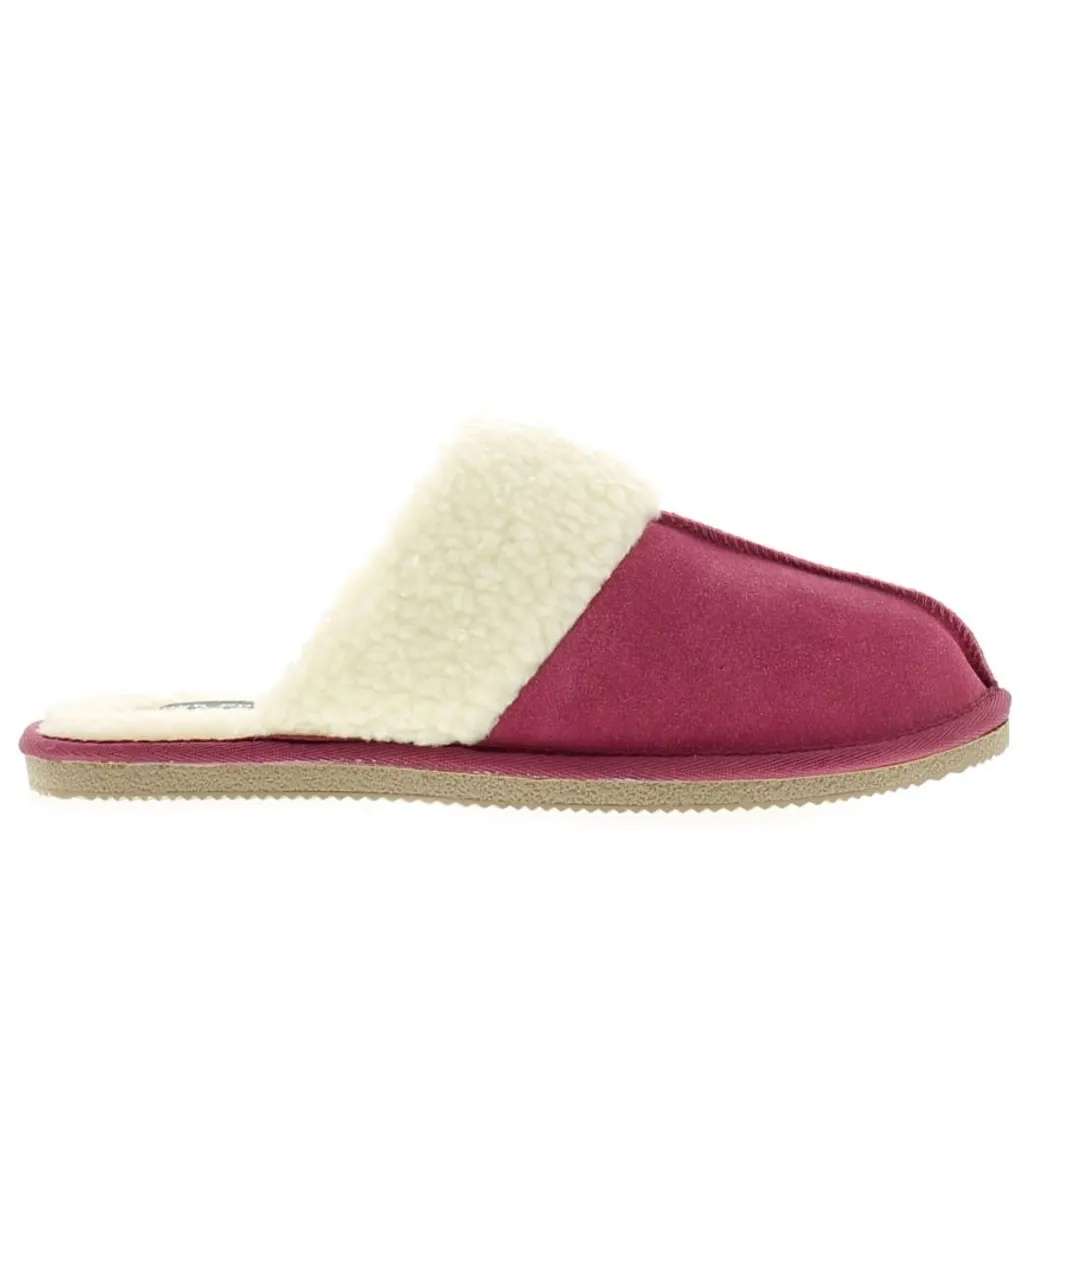 Hush Puppies arianna leather womens ladies mule slippers pink Suede